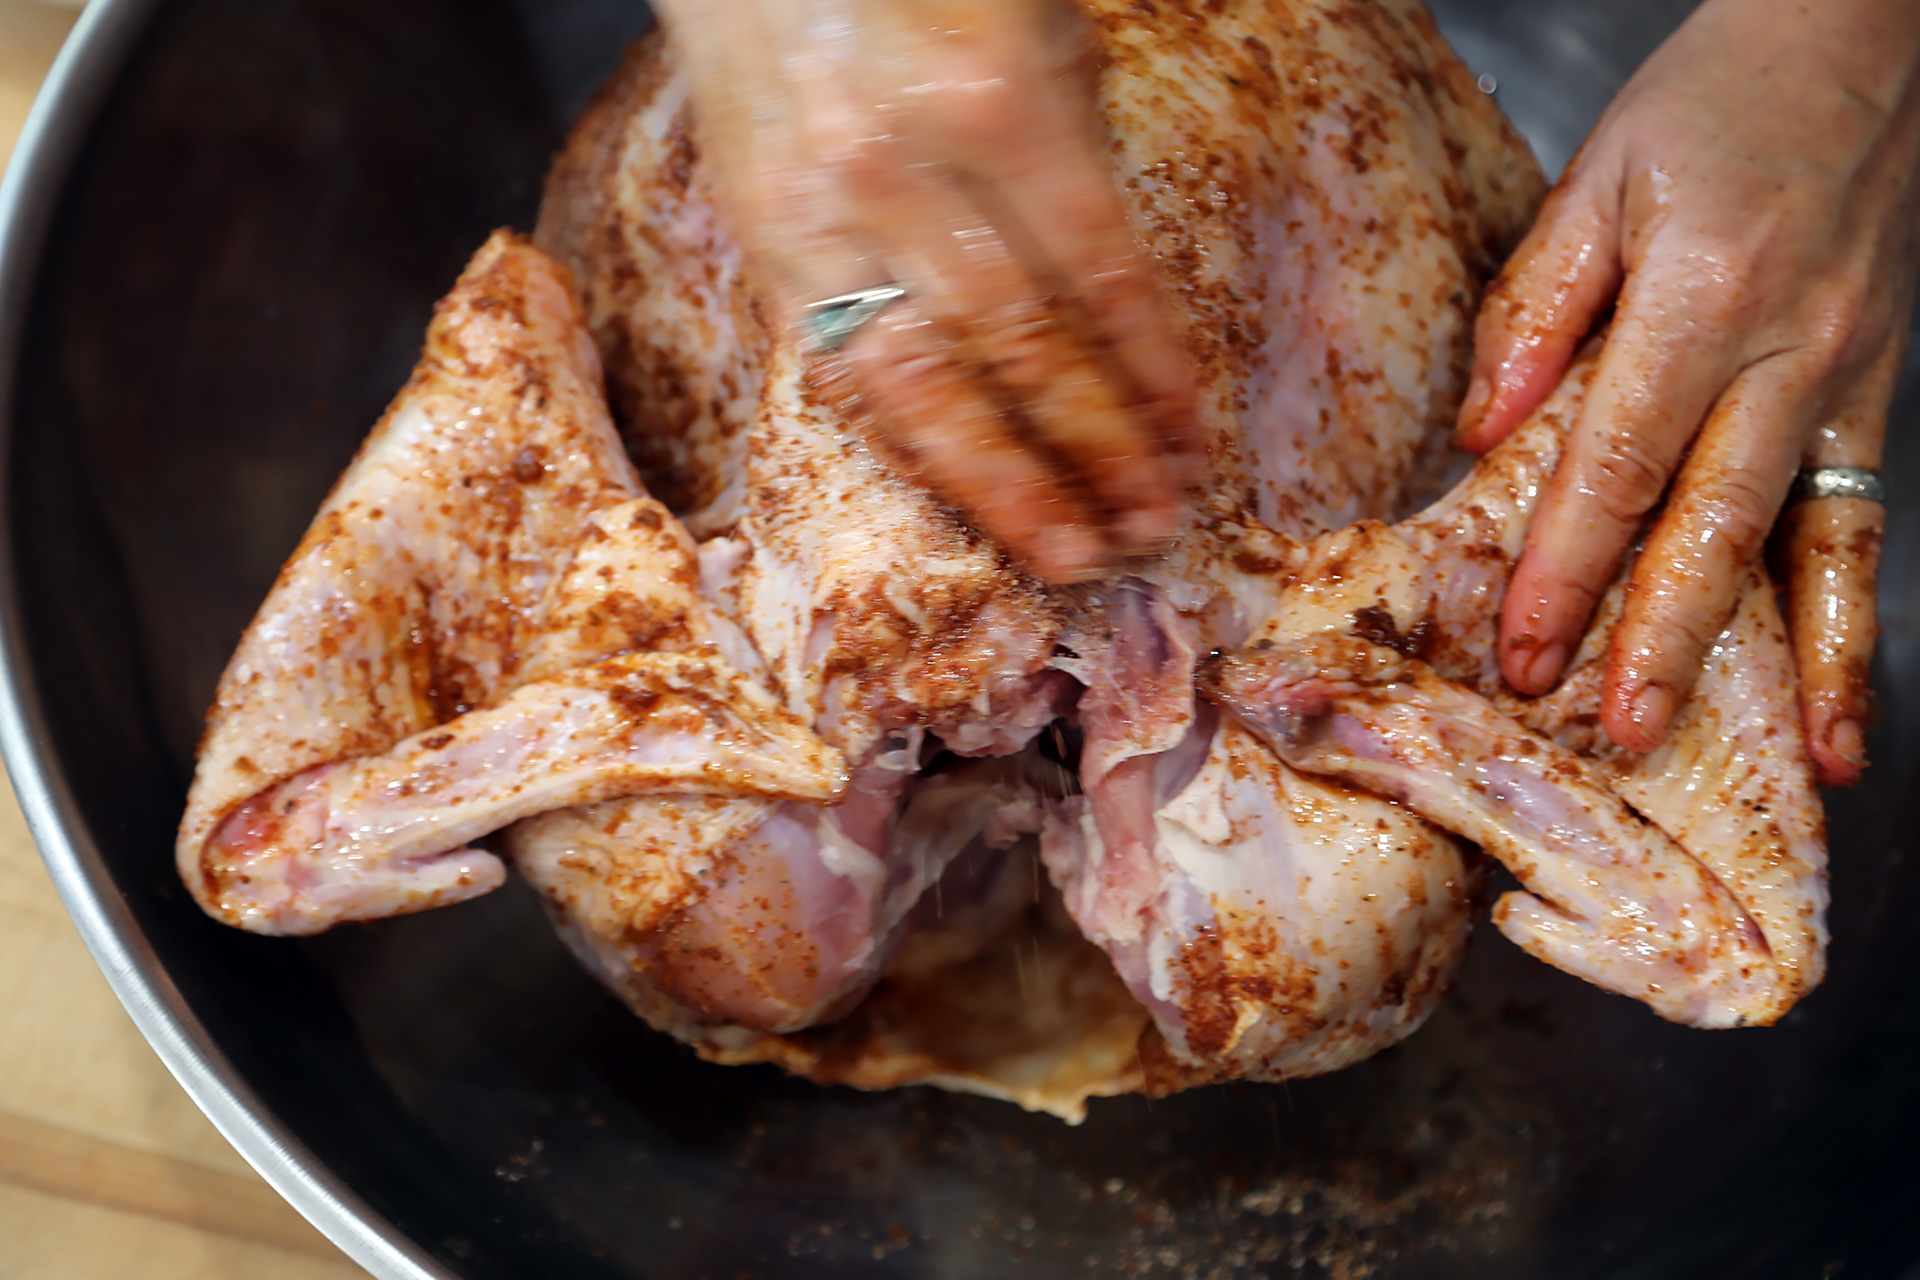 Spread the oil over the whole turkey, so the rub sticks and becomes pastelike. Tuck the wing tips under the turkey